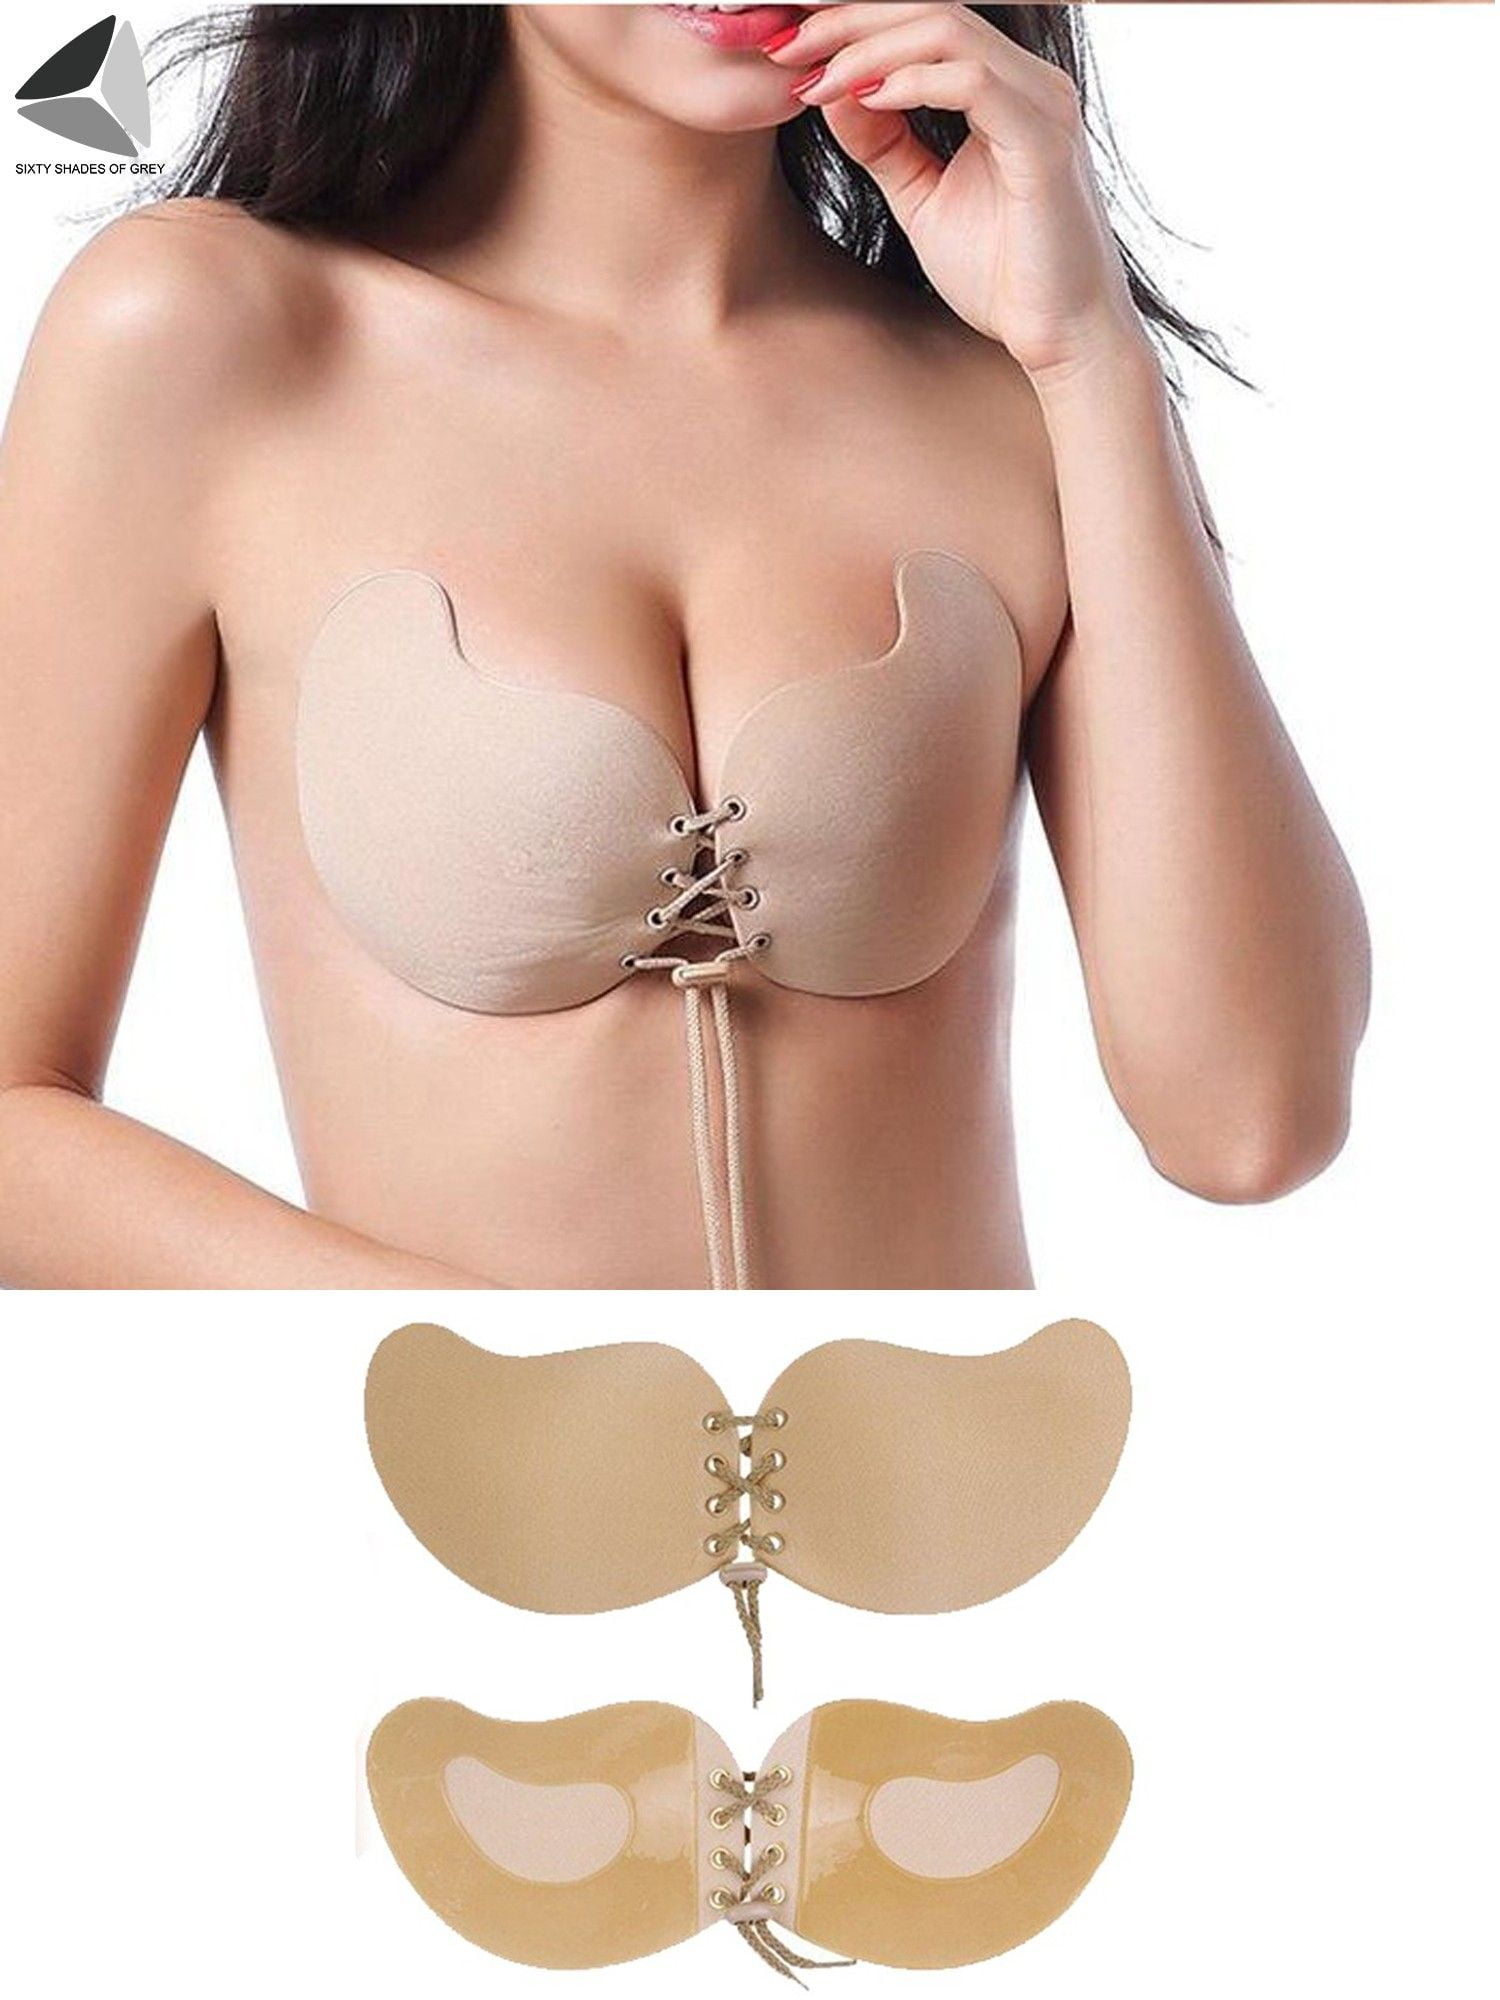 B Black&Nude Adhesive Invisible Bra Strapless Drawstring Push-up Silicone Bra for Women C Cup 2Pcs 